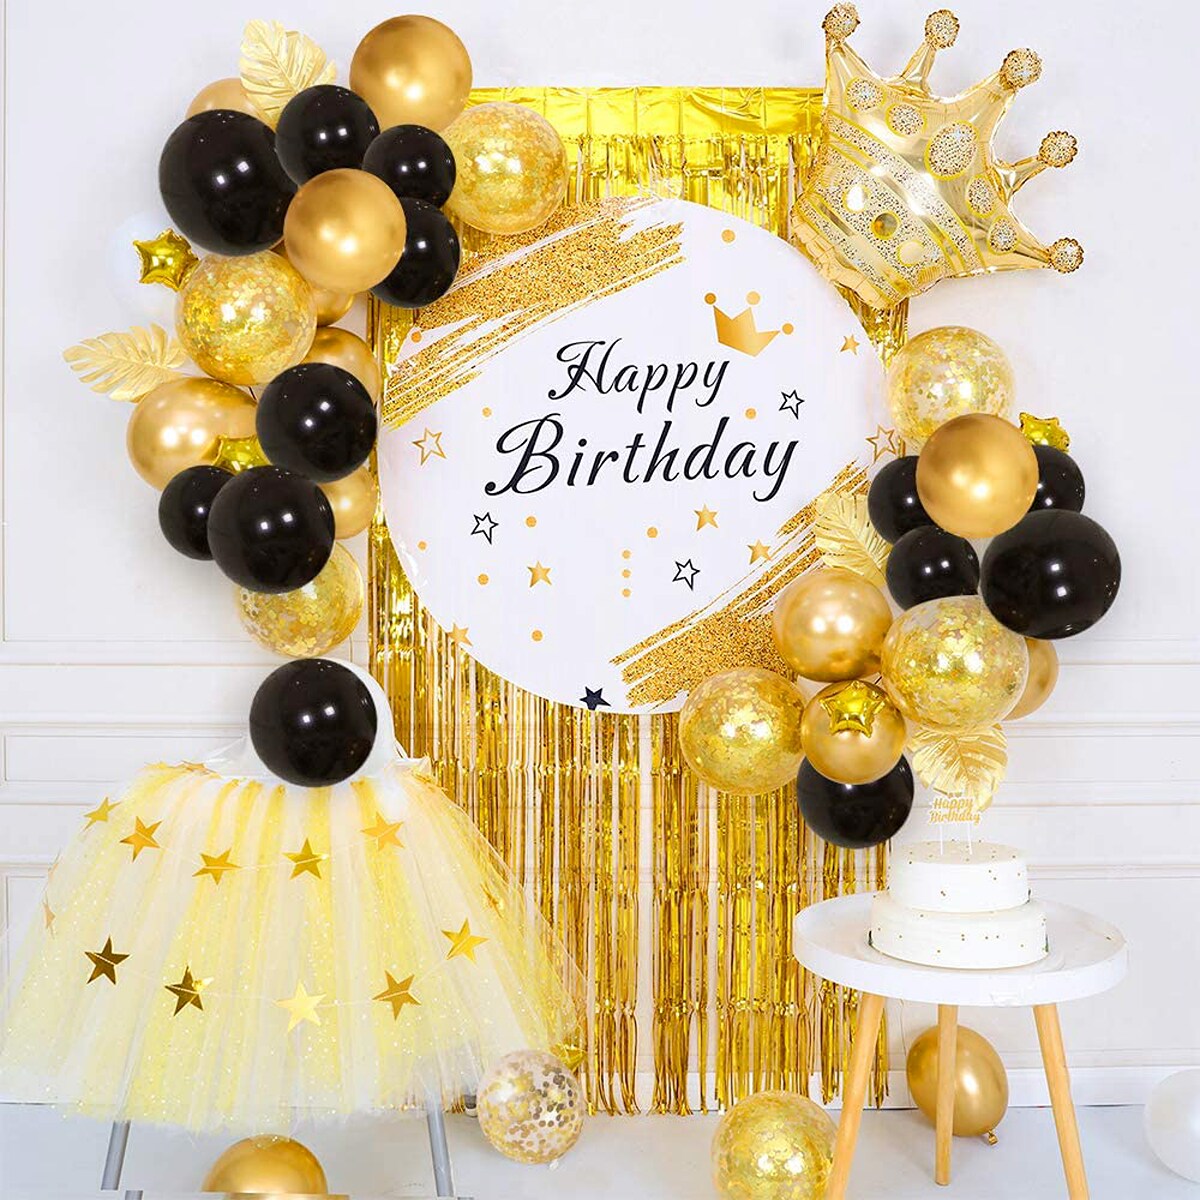 12 Inches Durable Latex Balloons for Party 50 pcs